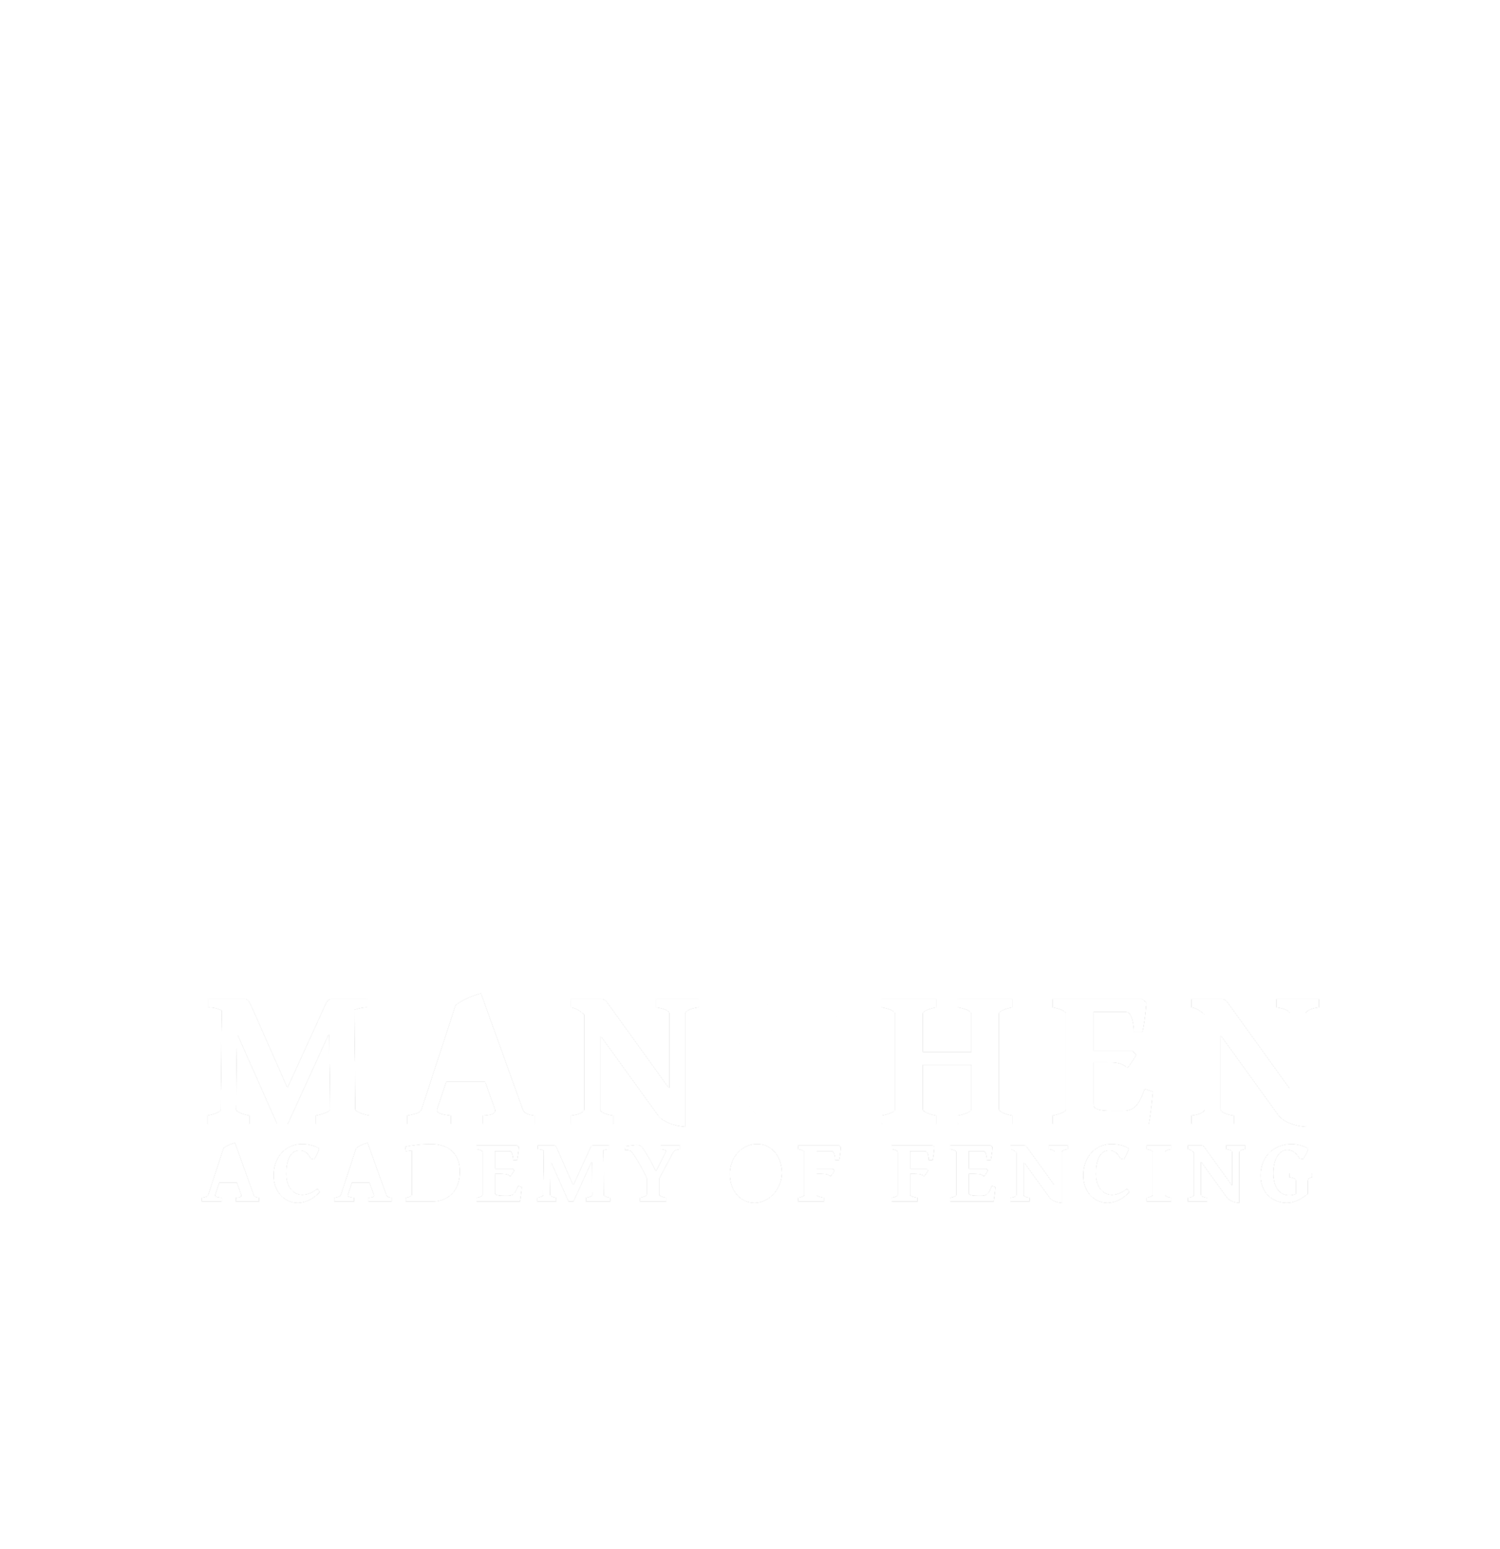 Manchen Academy of Fencing